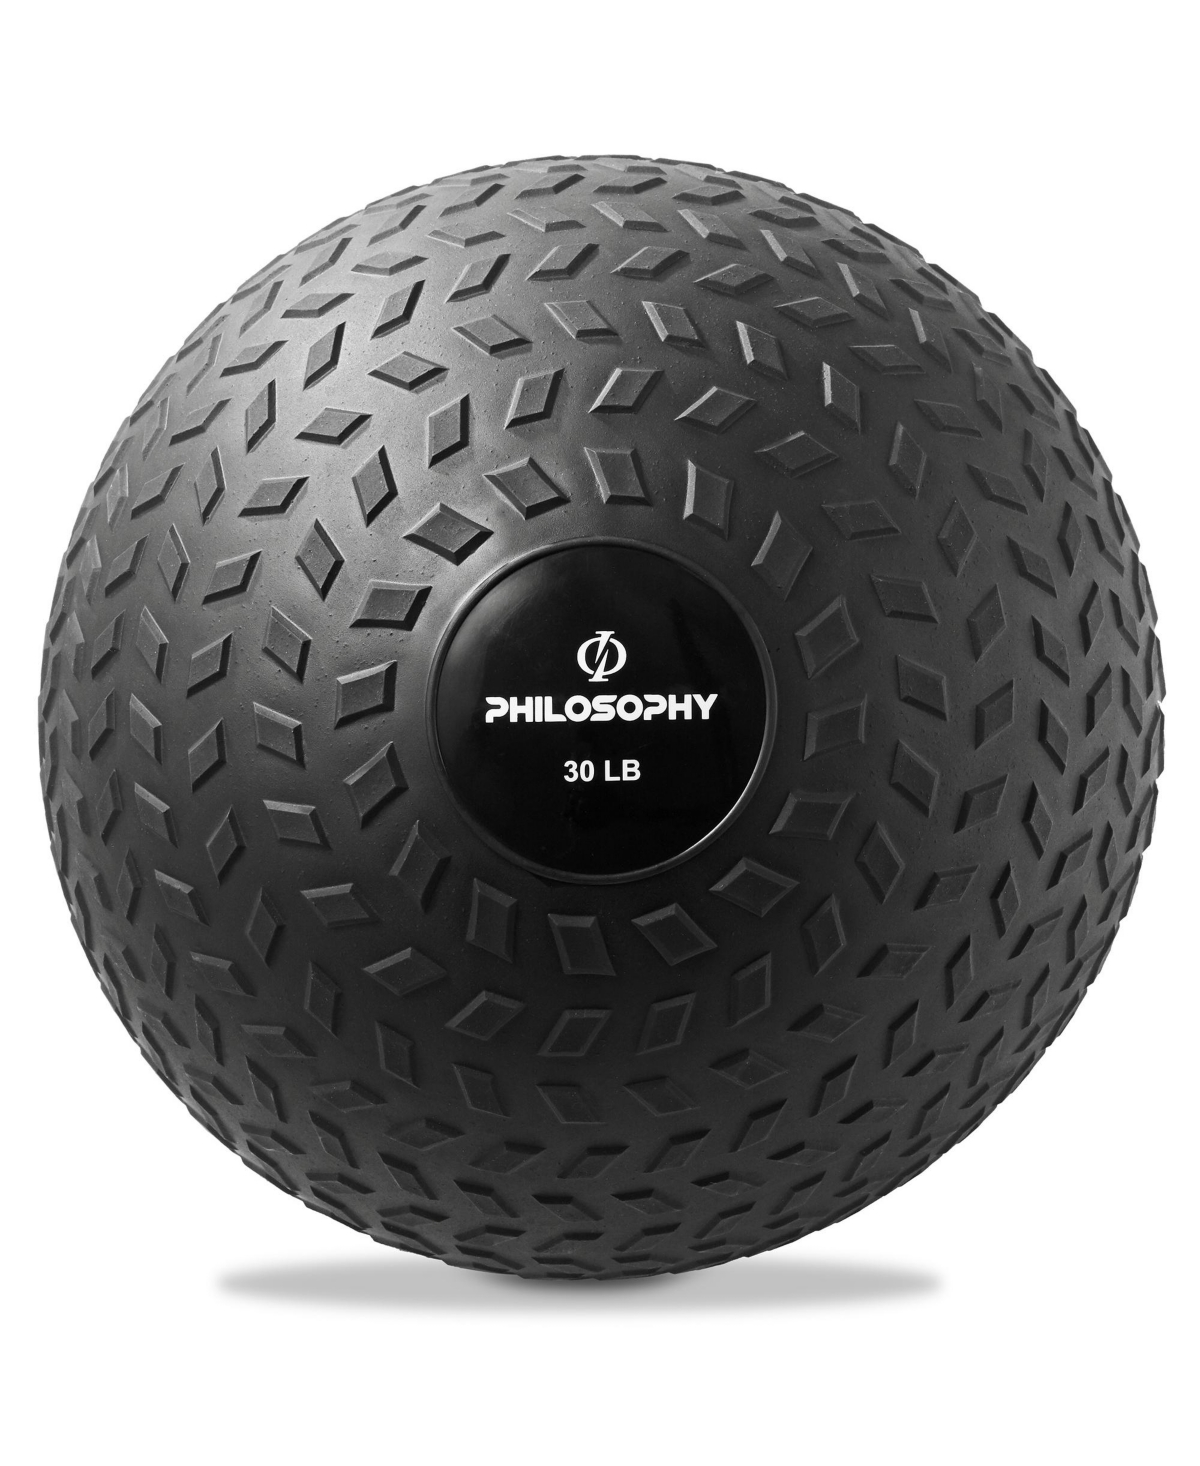 Slam Ball, 30 Lb - Weighted Fitness Medicine Ball with Easy Grip Tread - Black